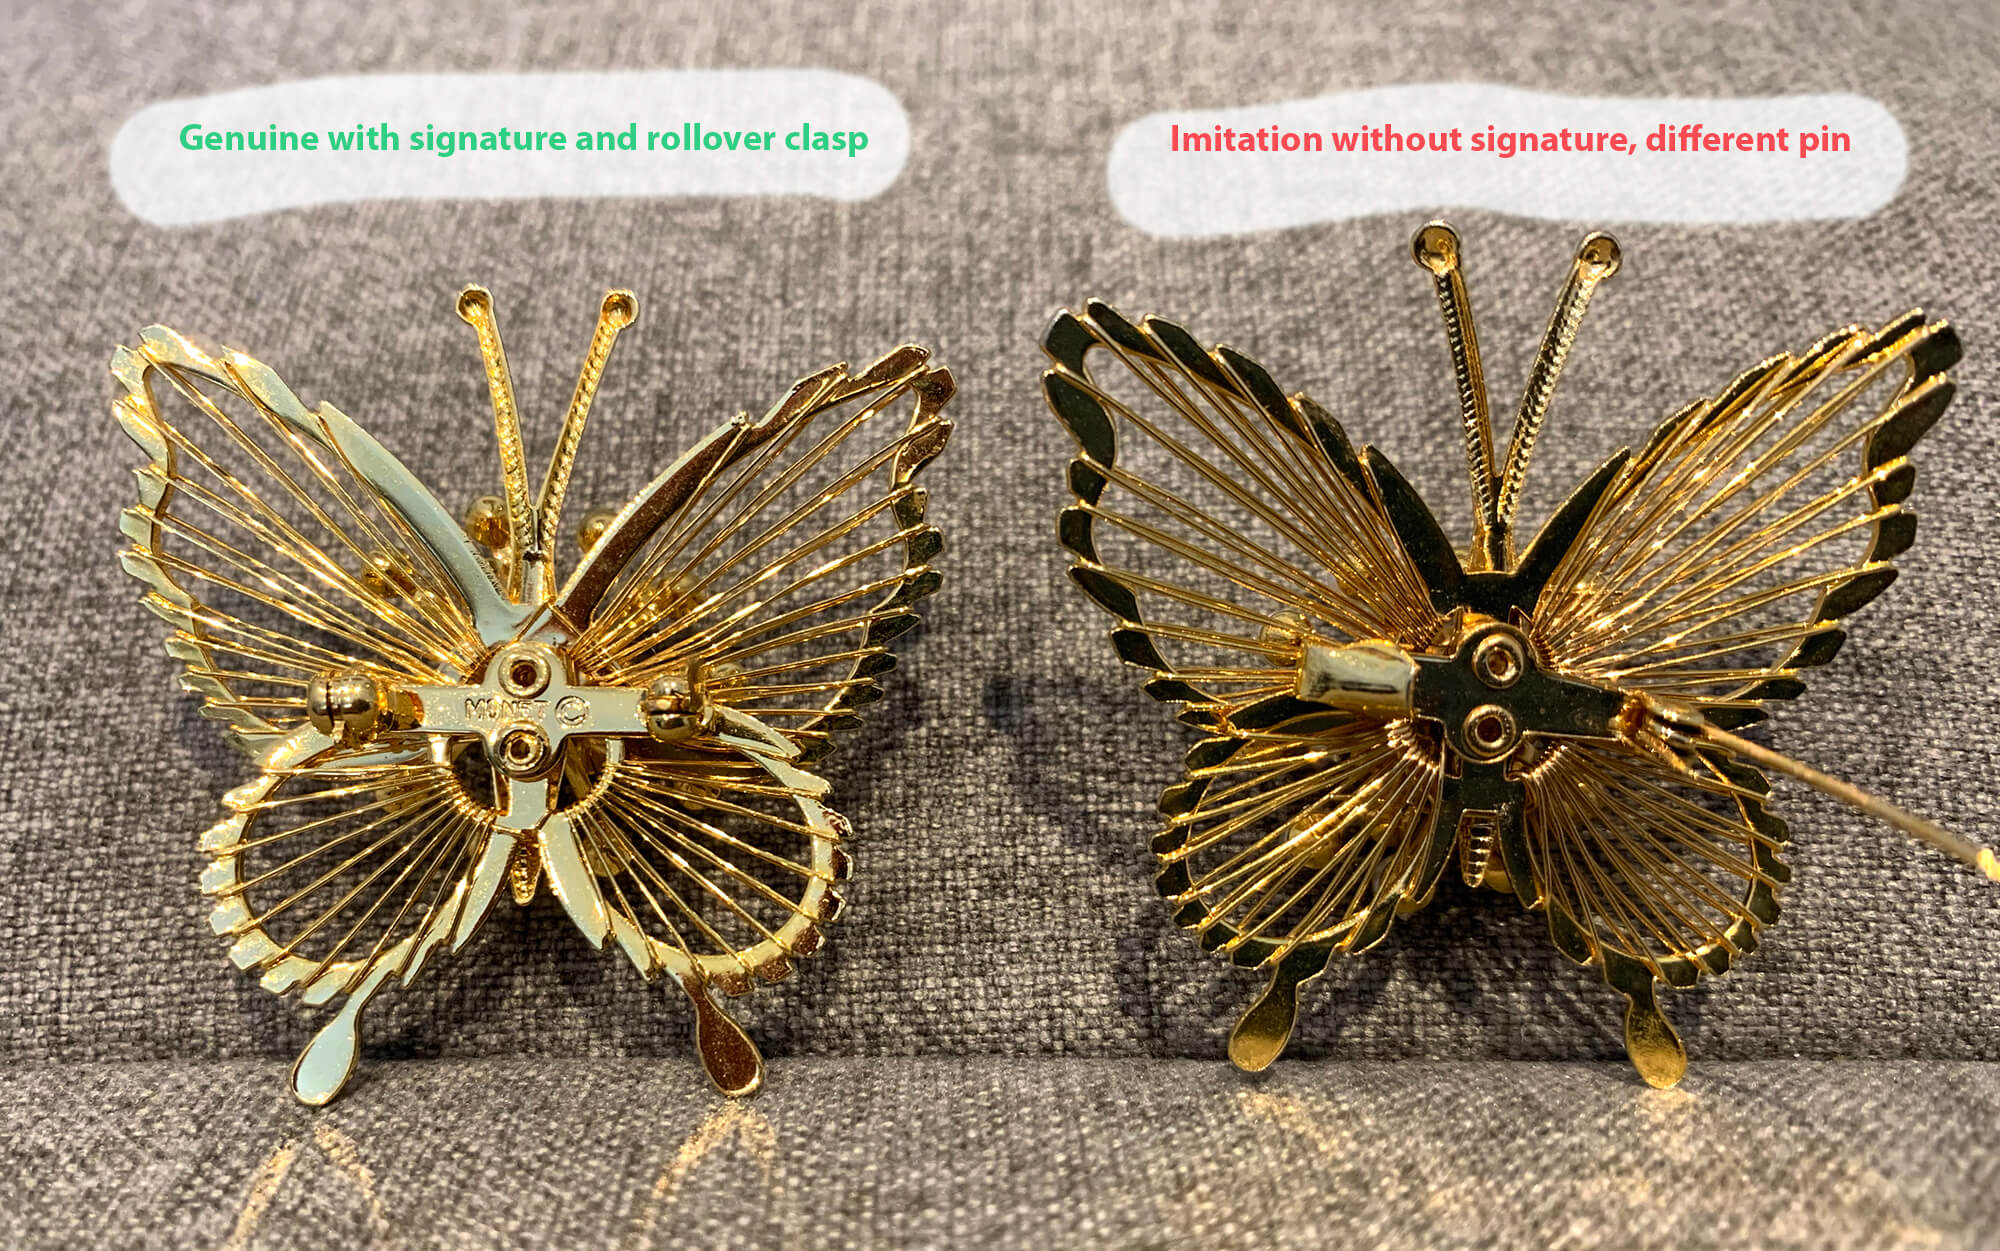 Monet butterfly pin and imitation pin